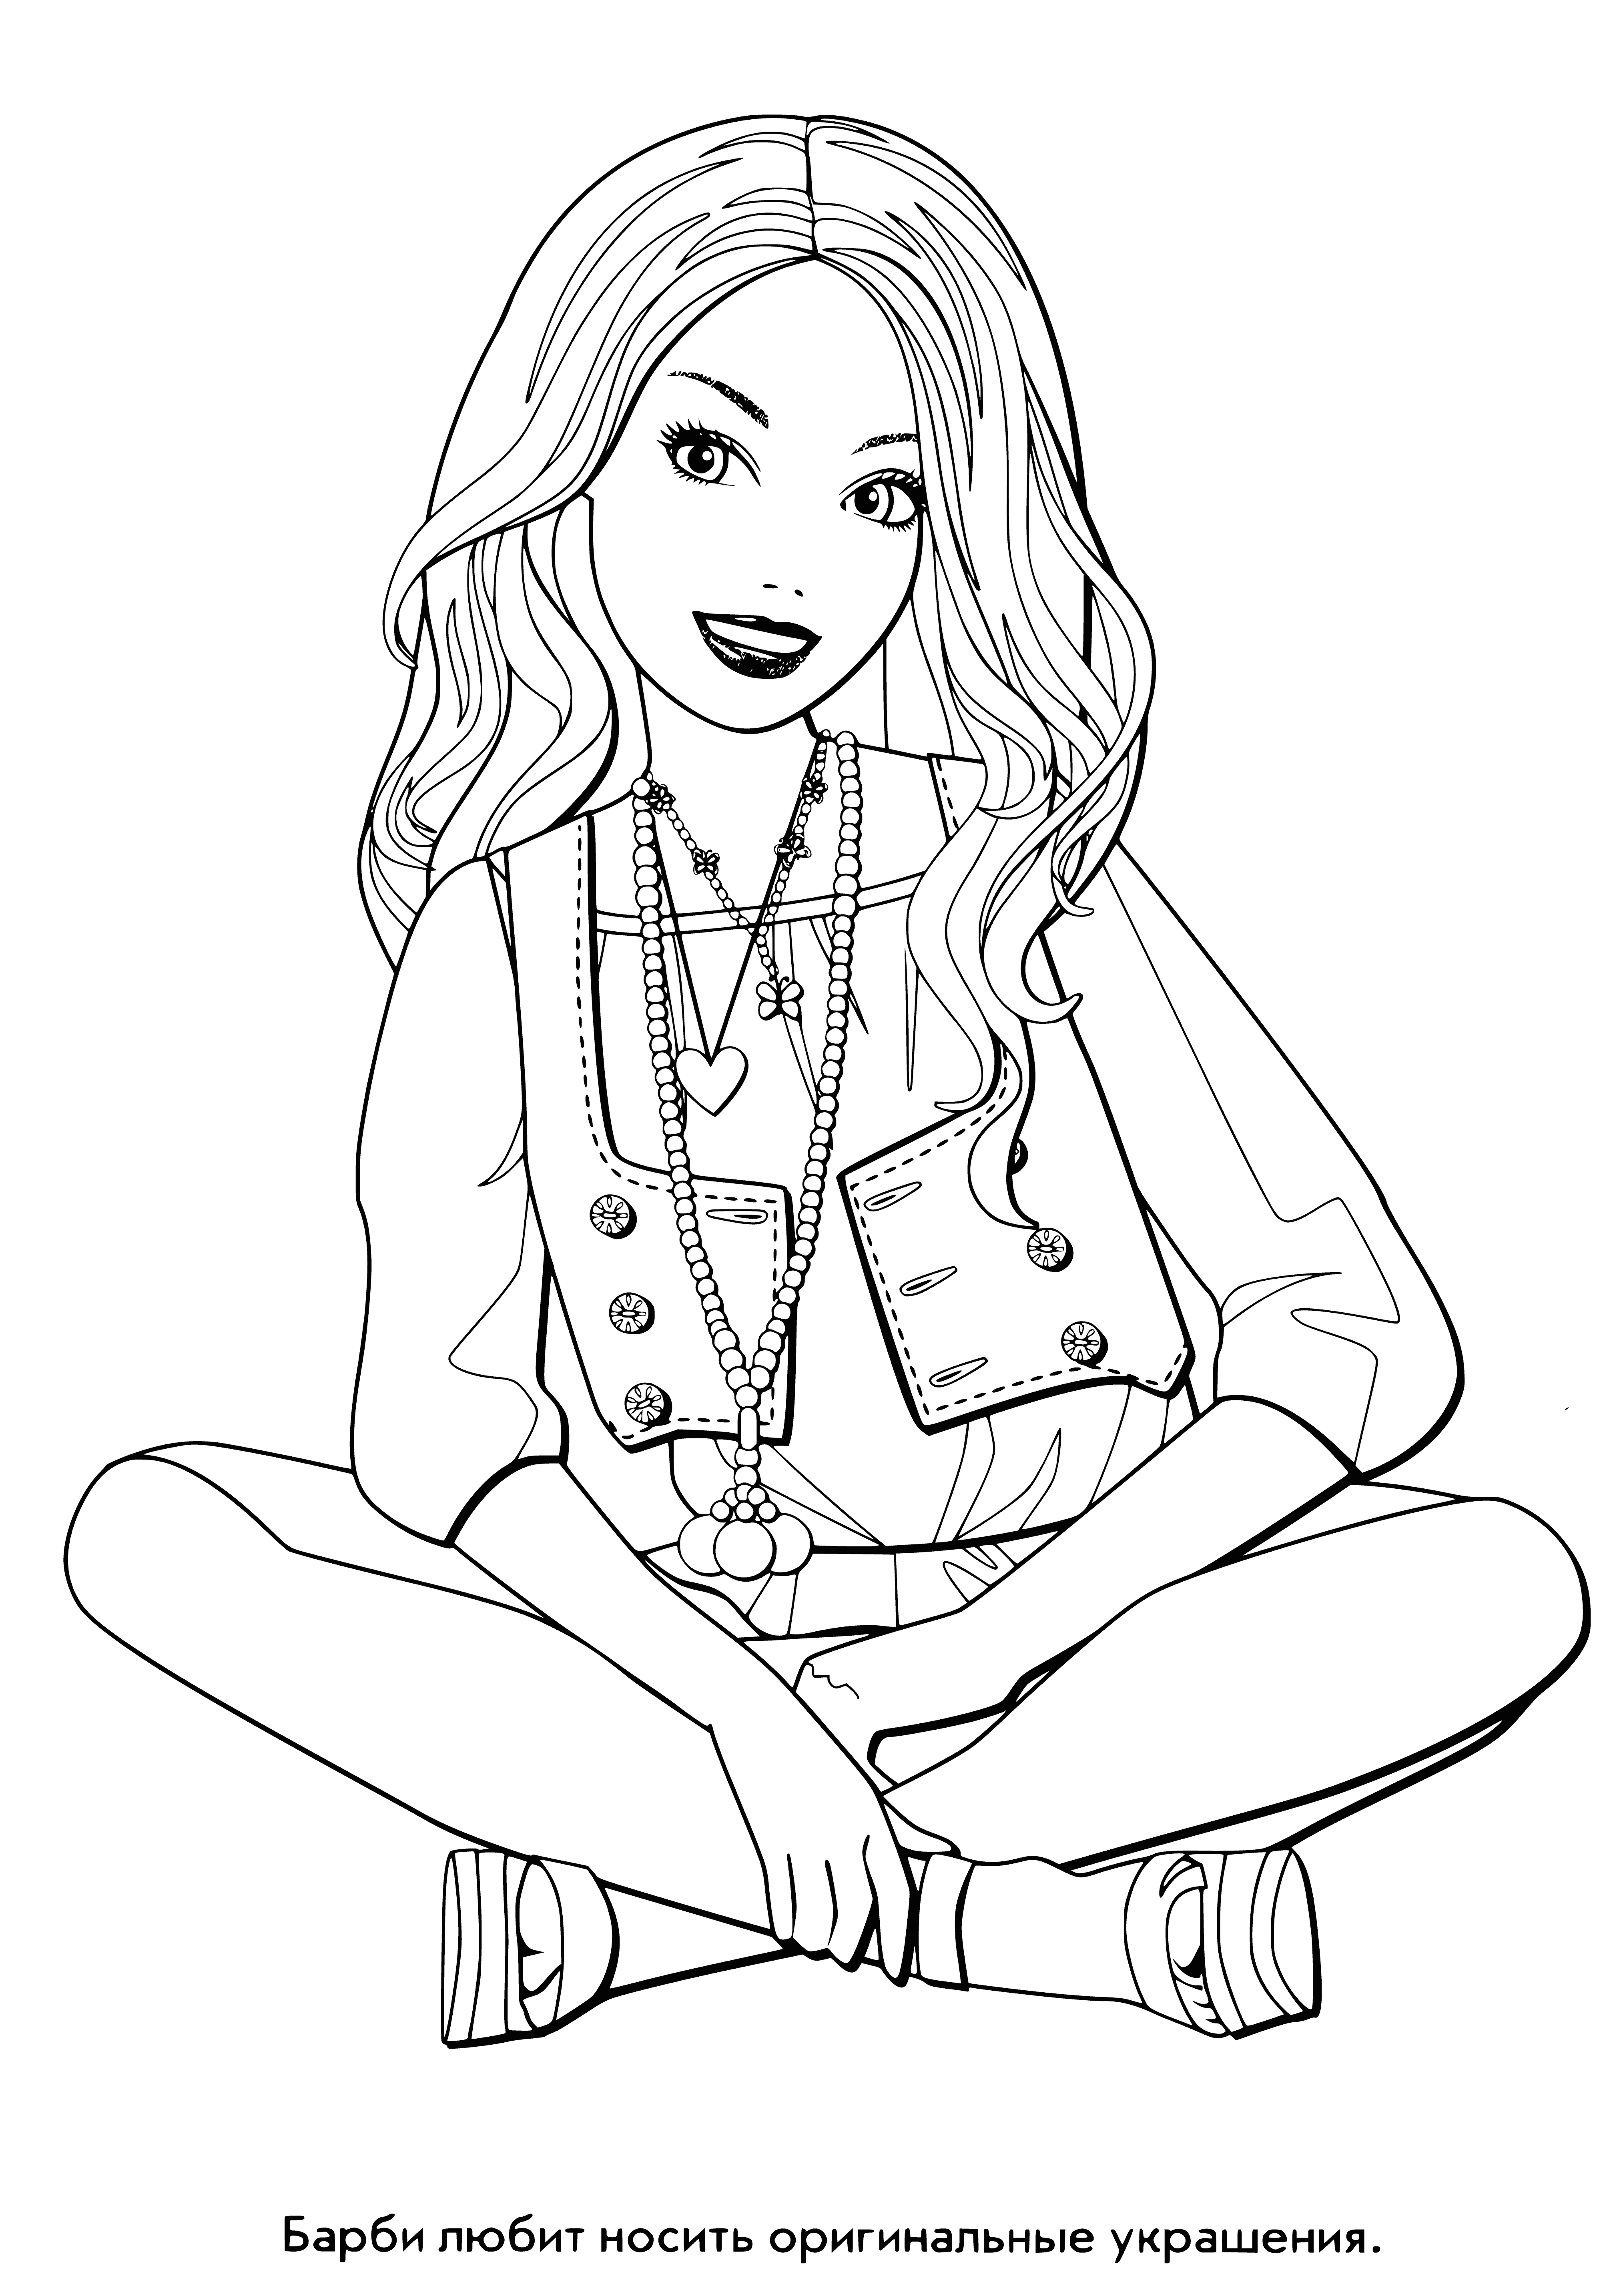 coloring page: Woman in white dress stands confidently in front of bright pink background, smiling. Hands on her hips and black belt draw attention to her waist. #confidence